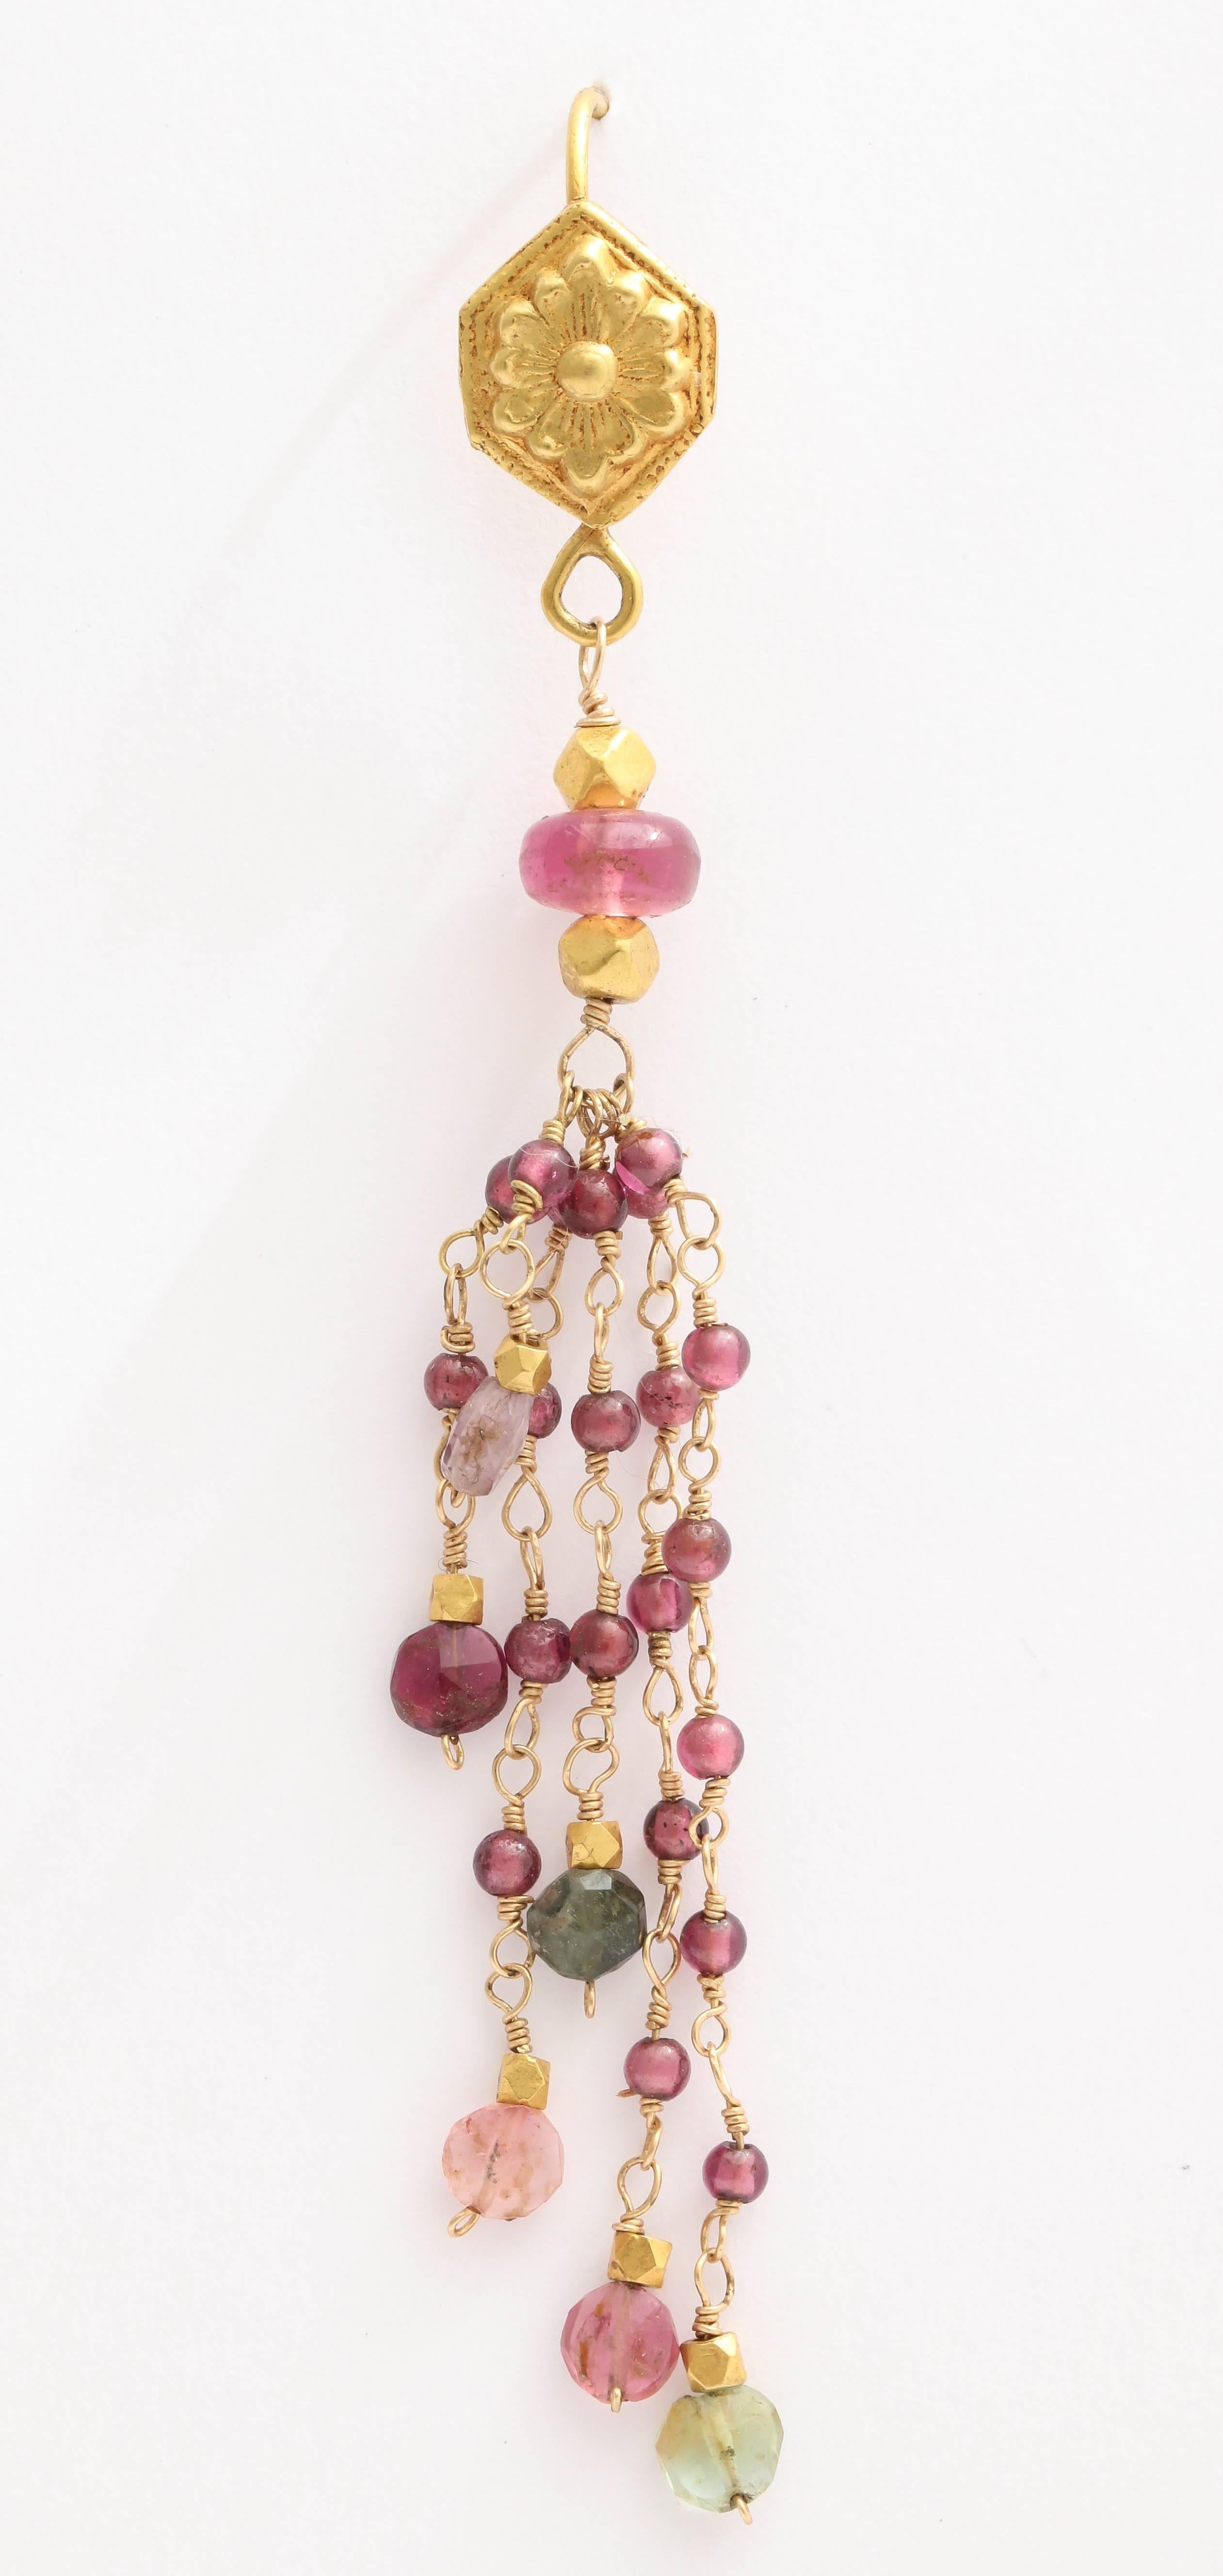 Each chain has hand wired  2 mm garnet beads with a faceted tourmaline bead at the end. The top of the earrings is a hand hammered floral design connected to the ear wire.  The beads are also interspersed with 18 kt gold faceted beads. The earrings